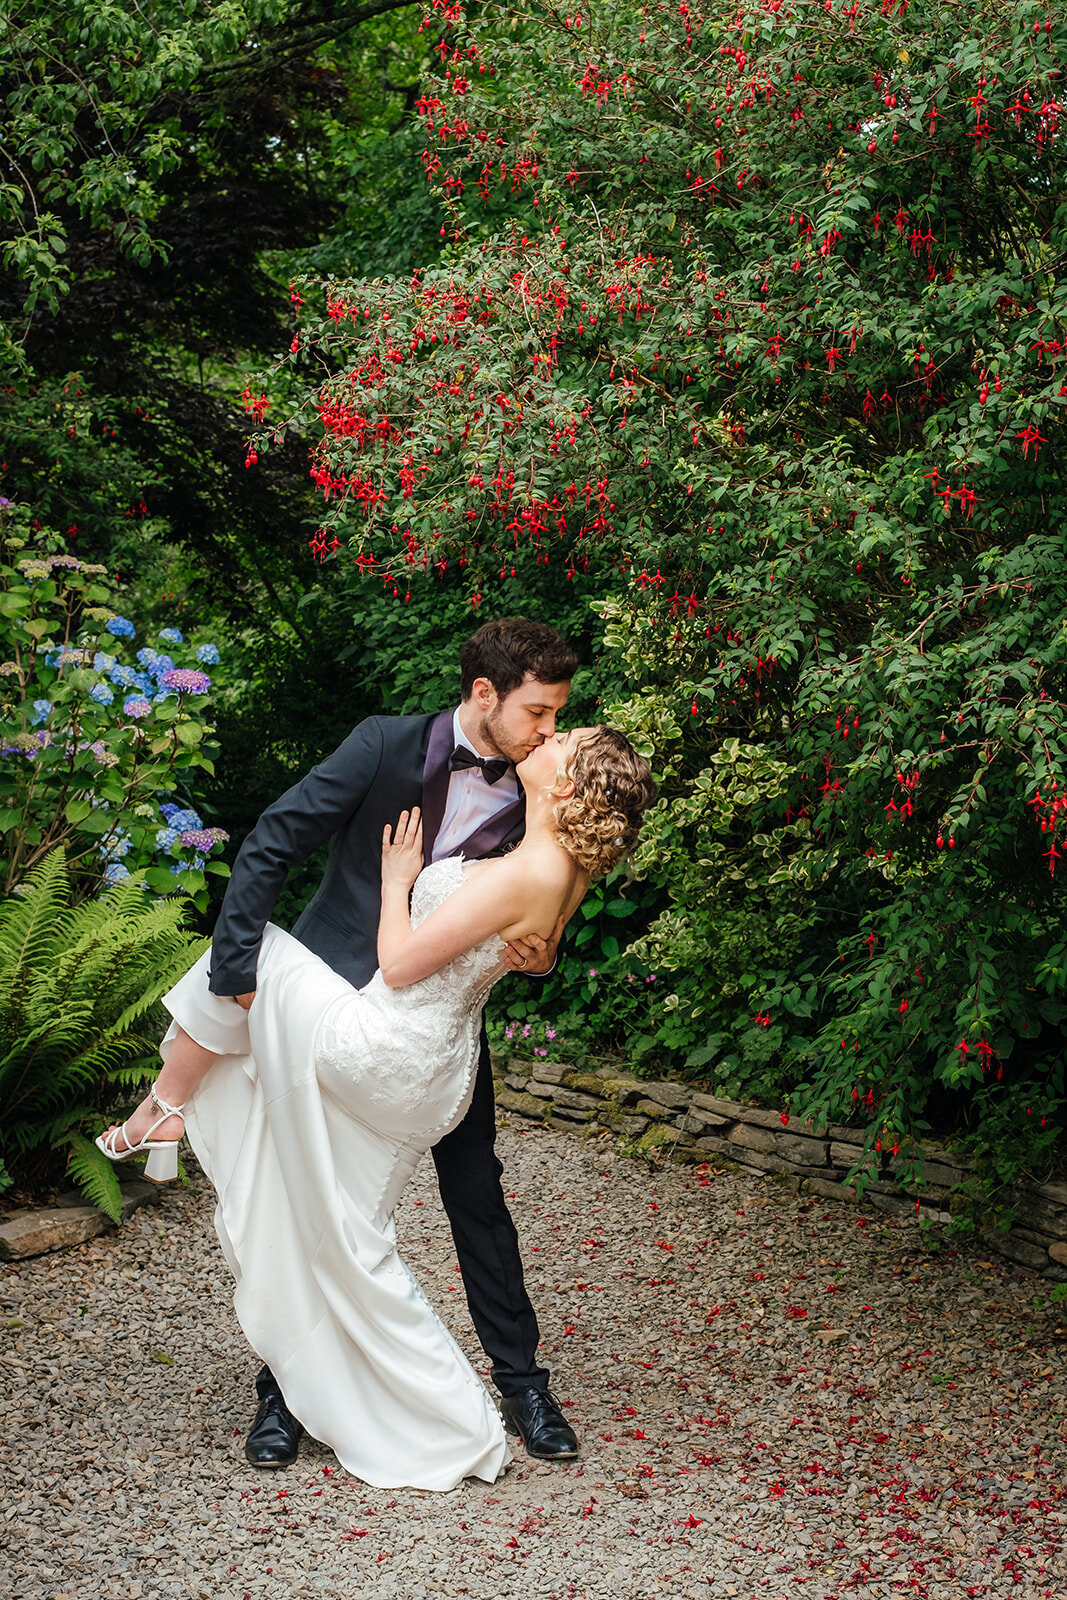 Kilminorth Cottages styled wedding shoot - Charlie Flounders Photography -0346